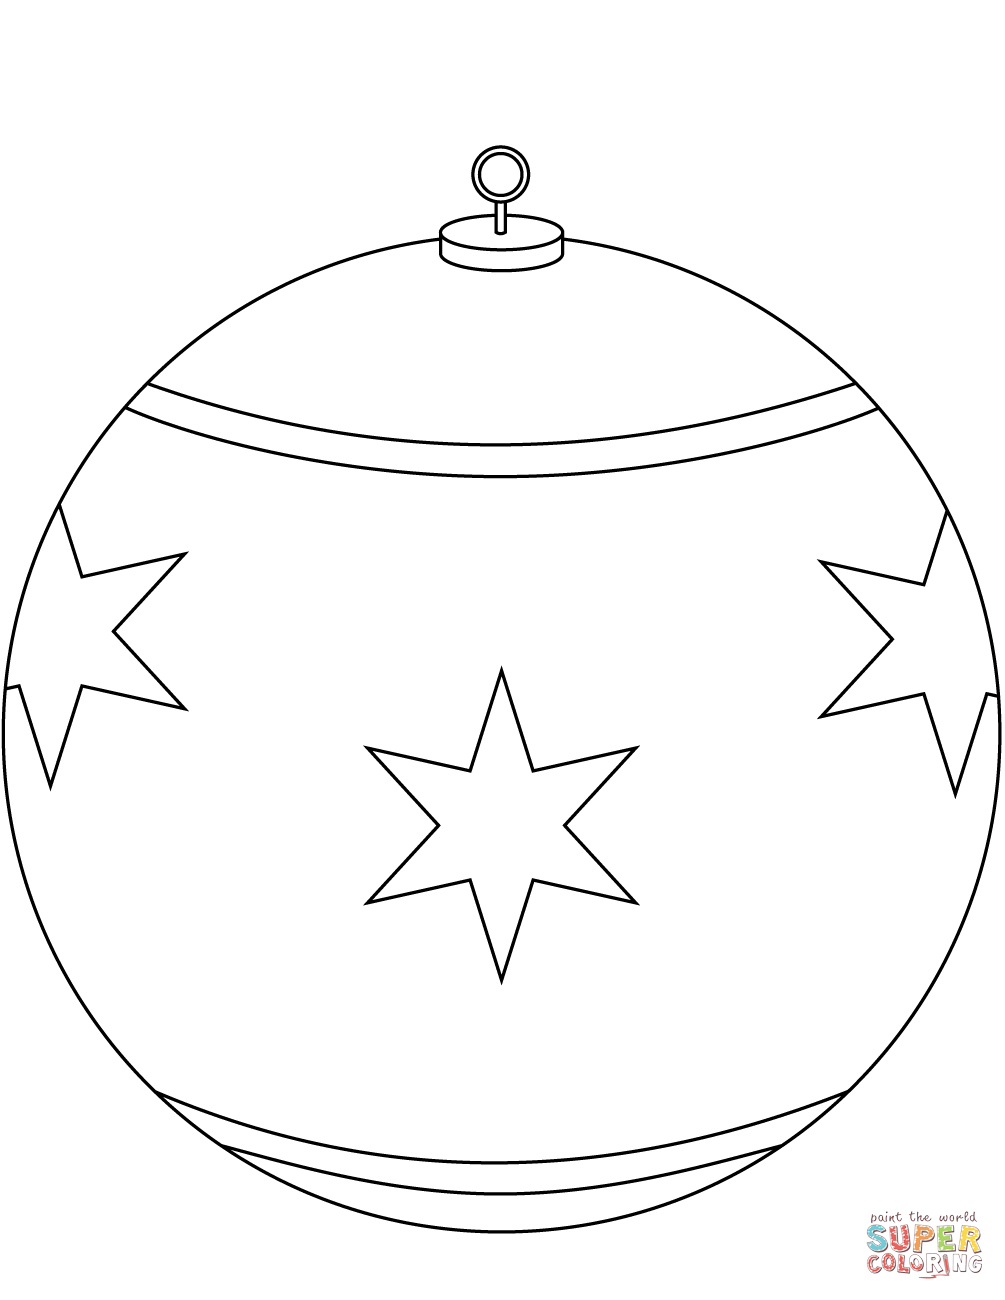 Round Christmas Ornament Coloring Page | Free Printable Coloring Pages - Free Printable Christmas Ornament Coloring Pages